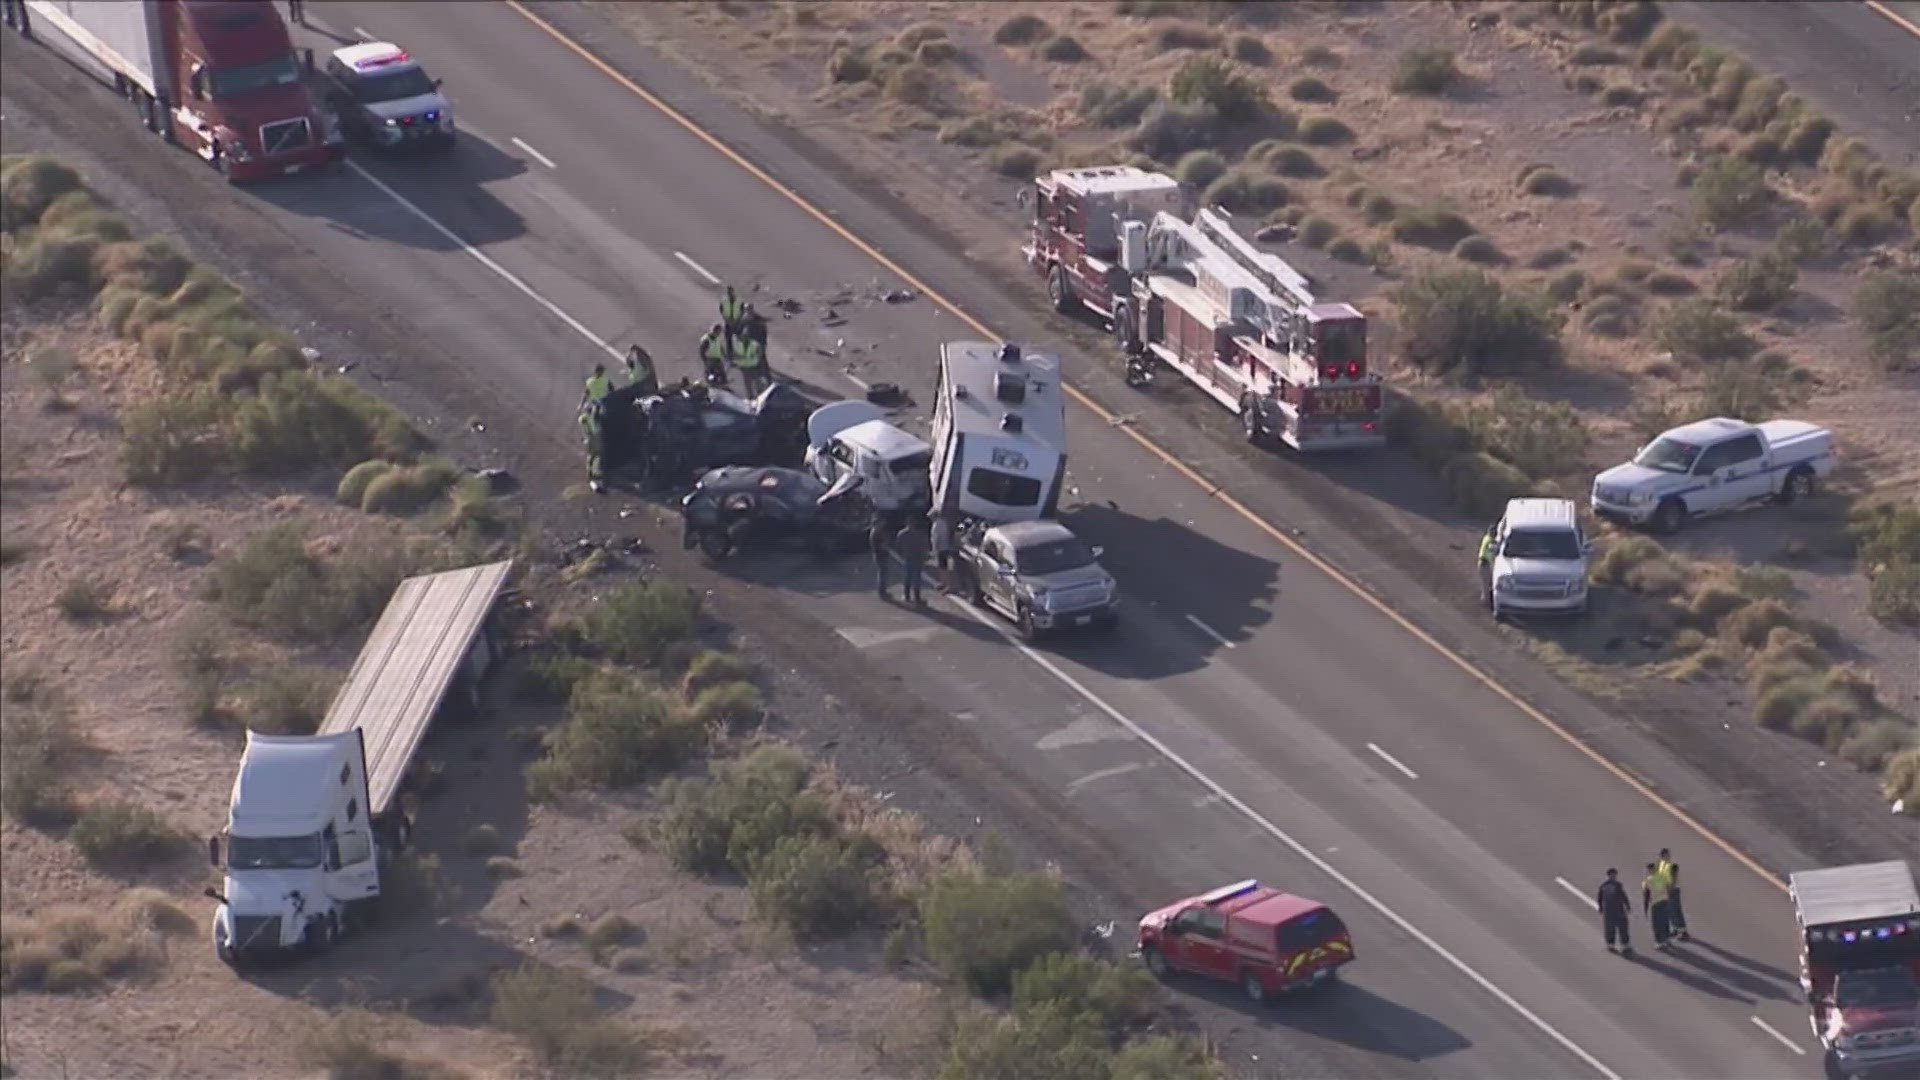 The closure is due to a crash at milepost 105, according to ADOT.